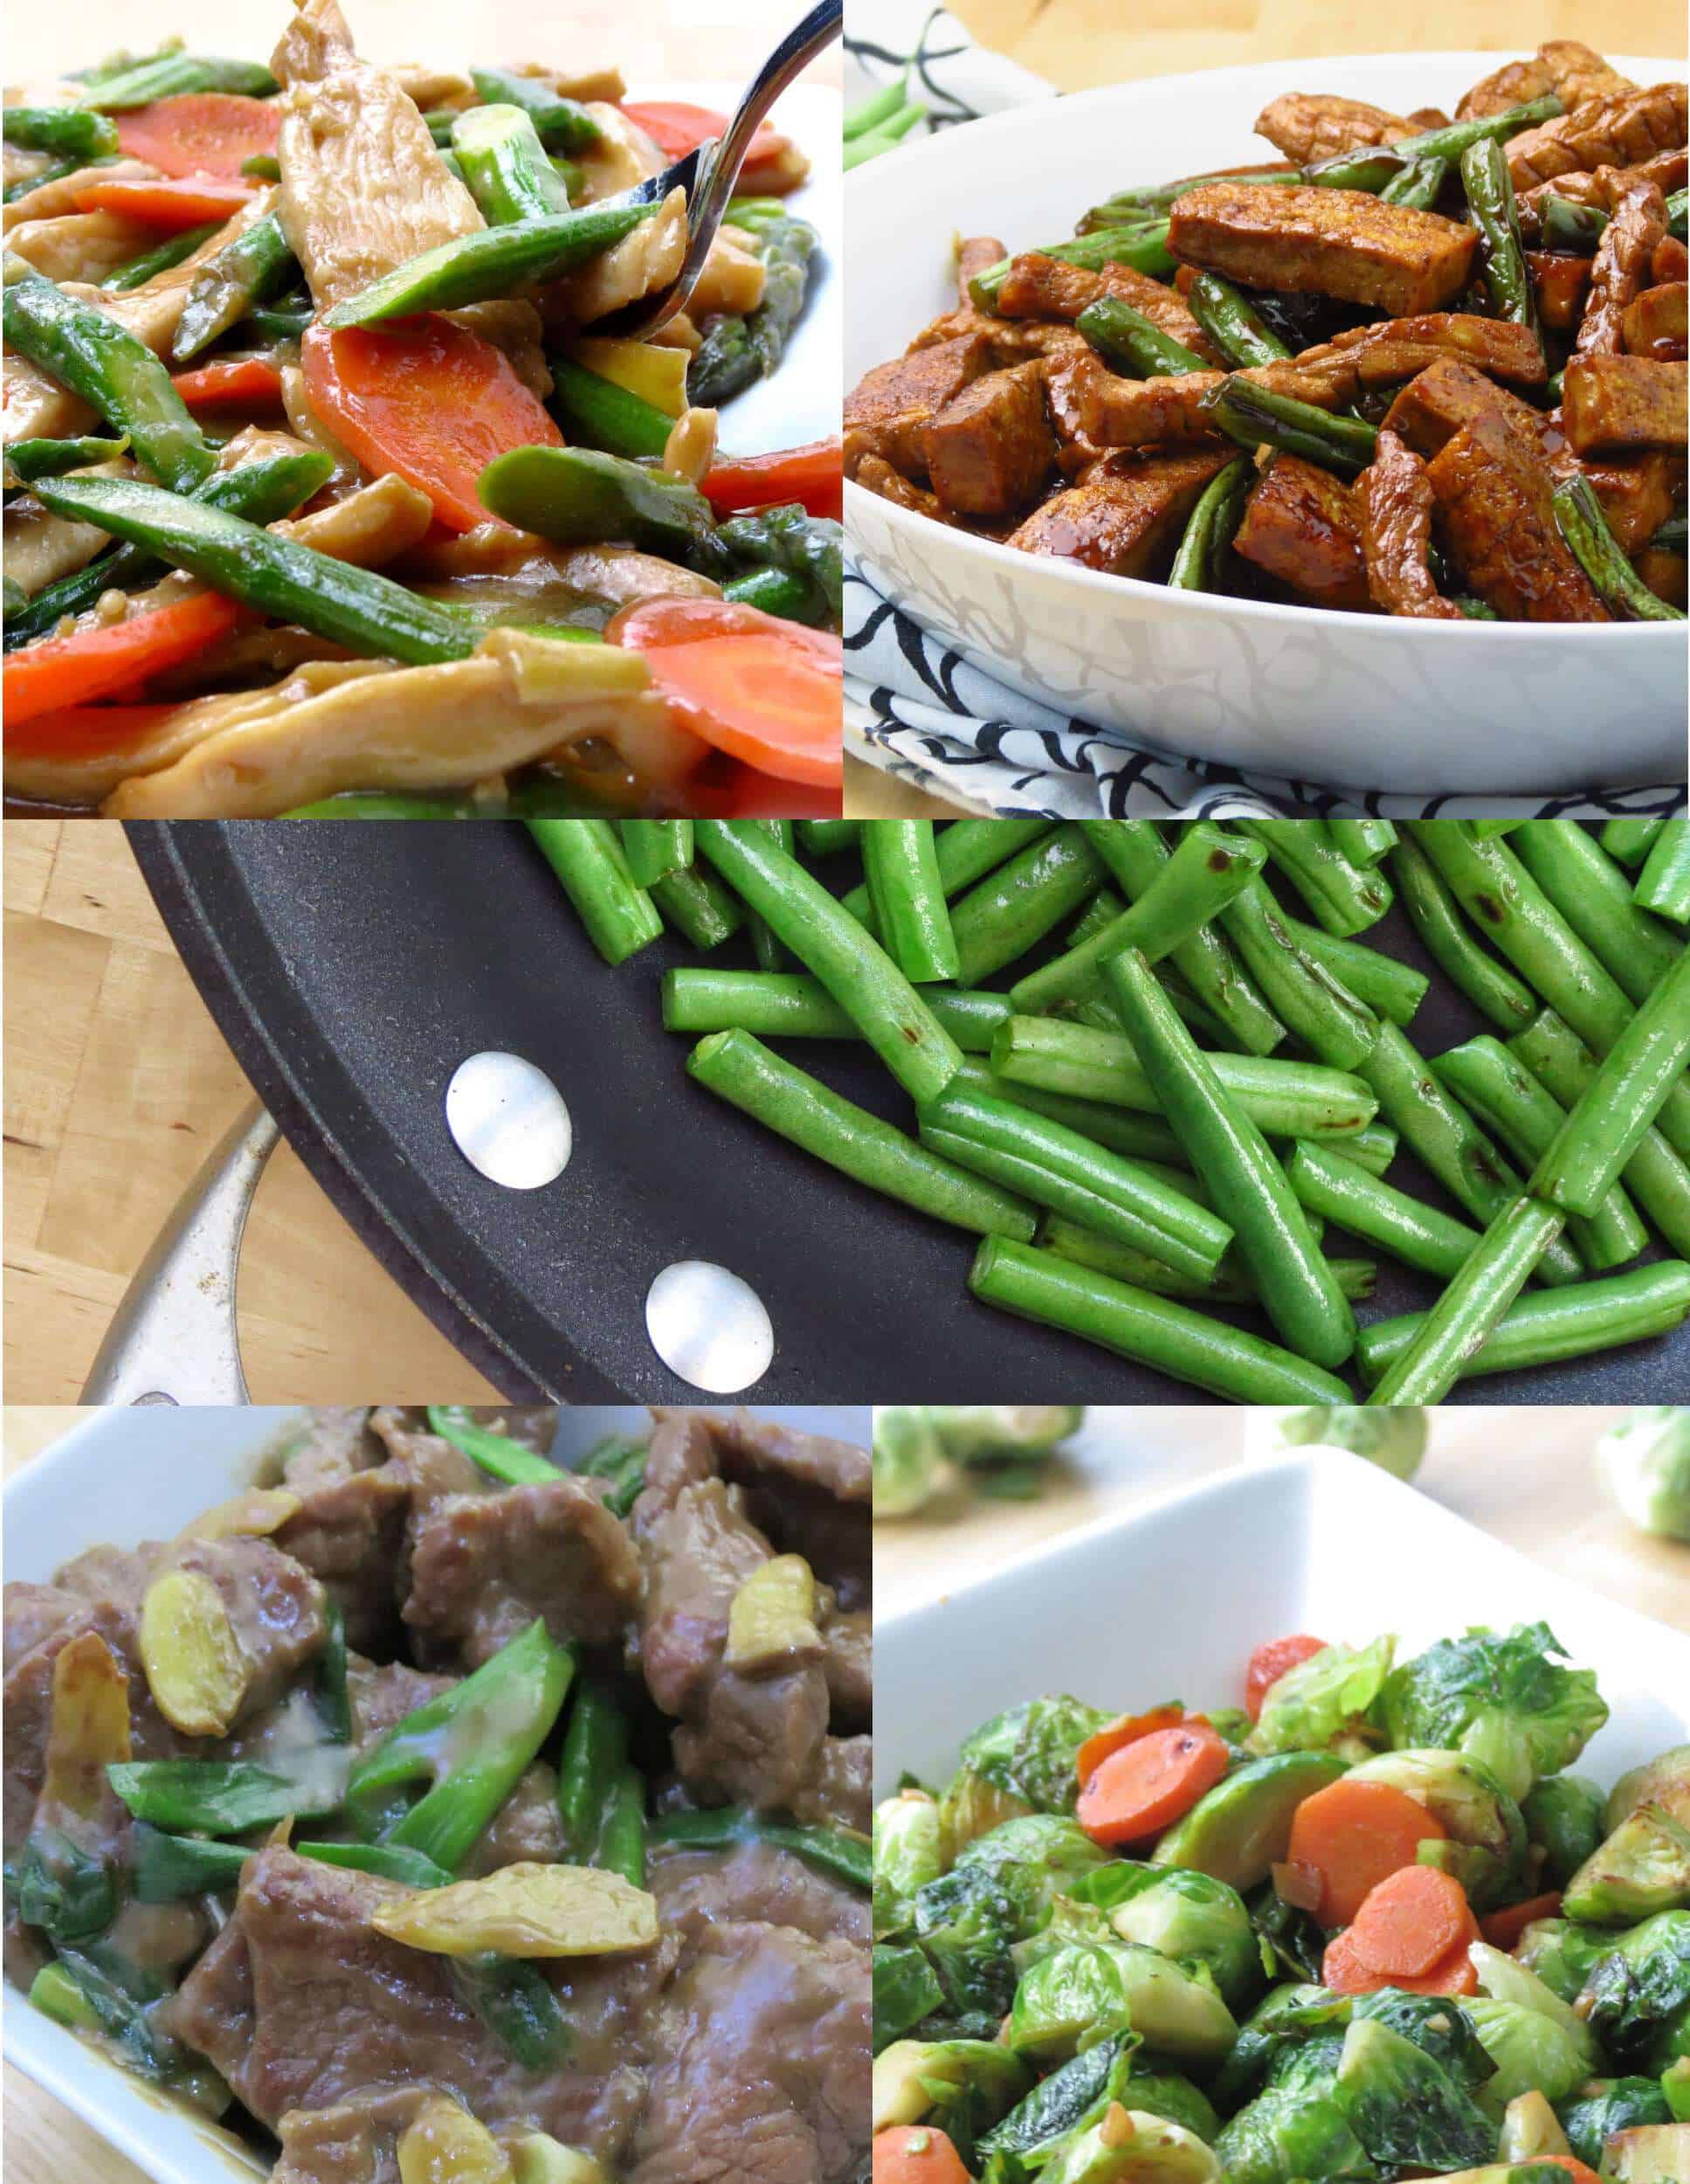 8 Tips to a Great Stir Fry